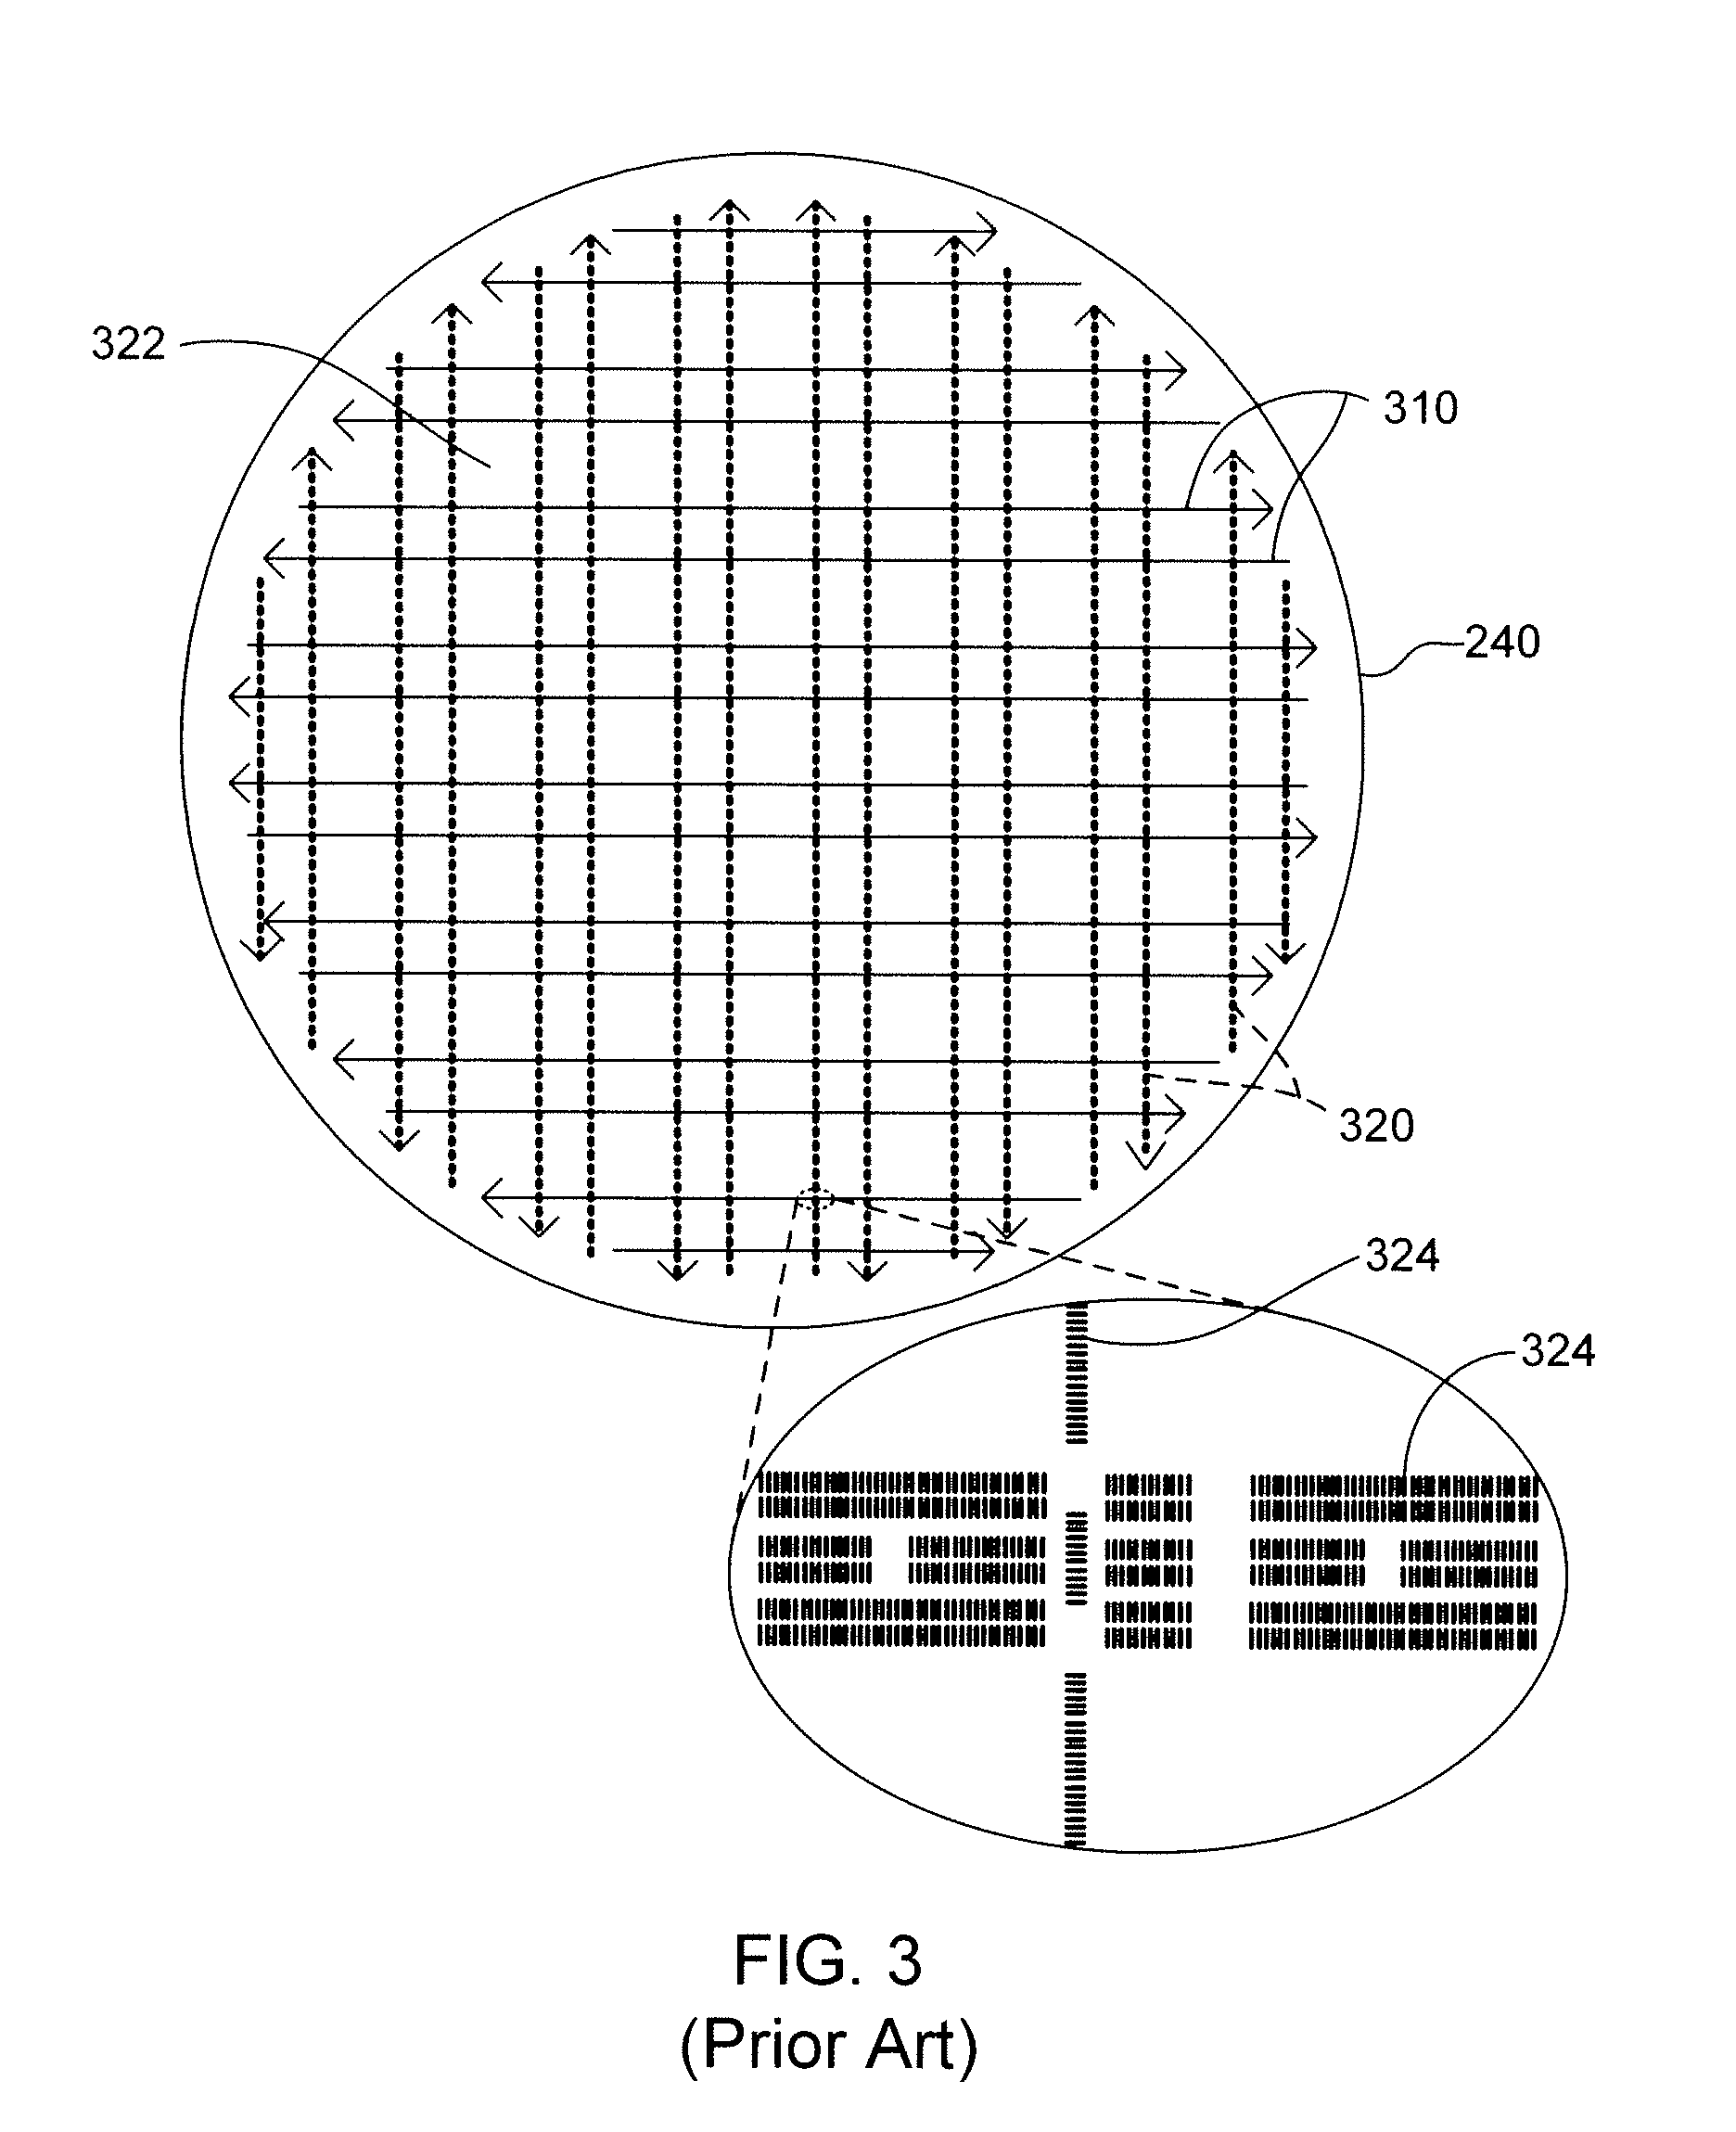 Systems and methods for adapting parameters to increase throughput during laser-based wafer processing